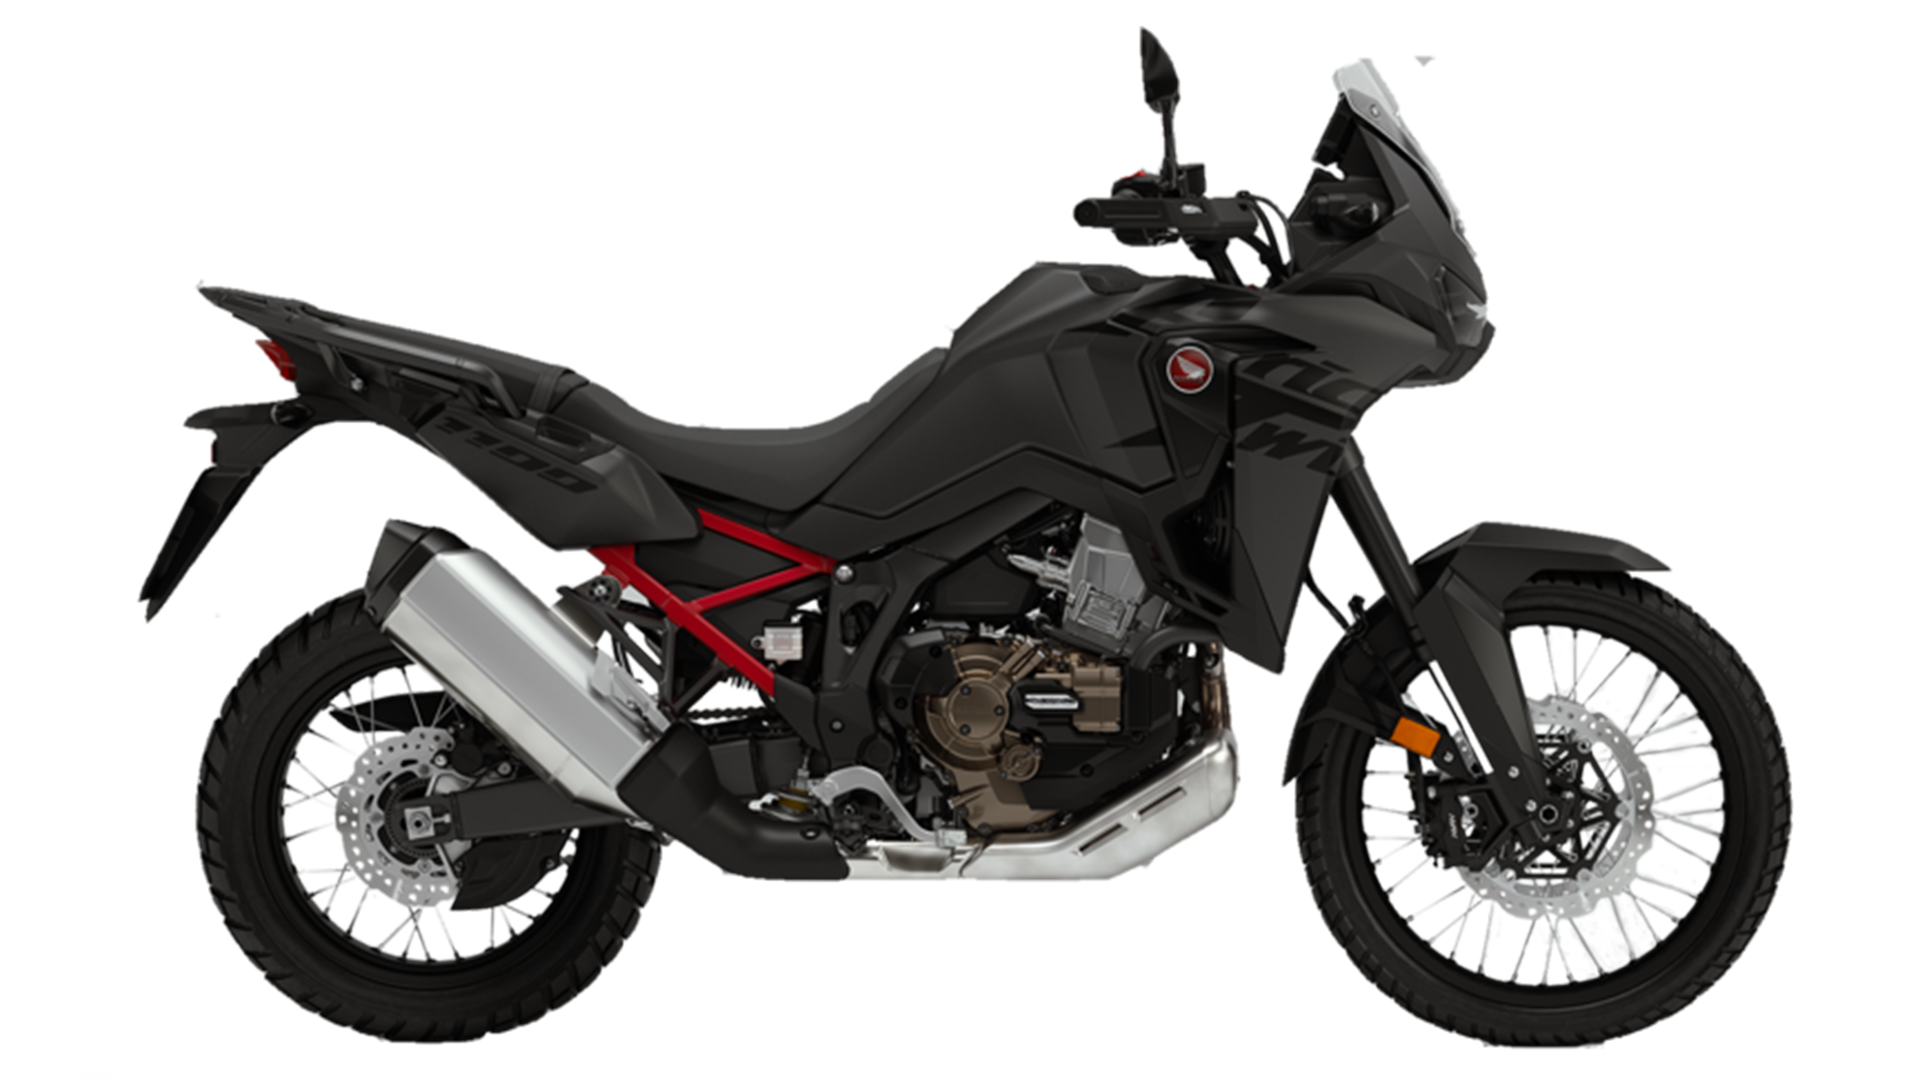 CRF 1100 L Africa Twin